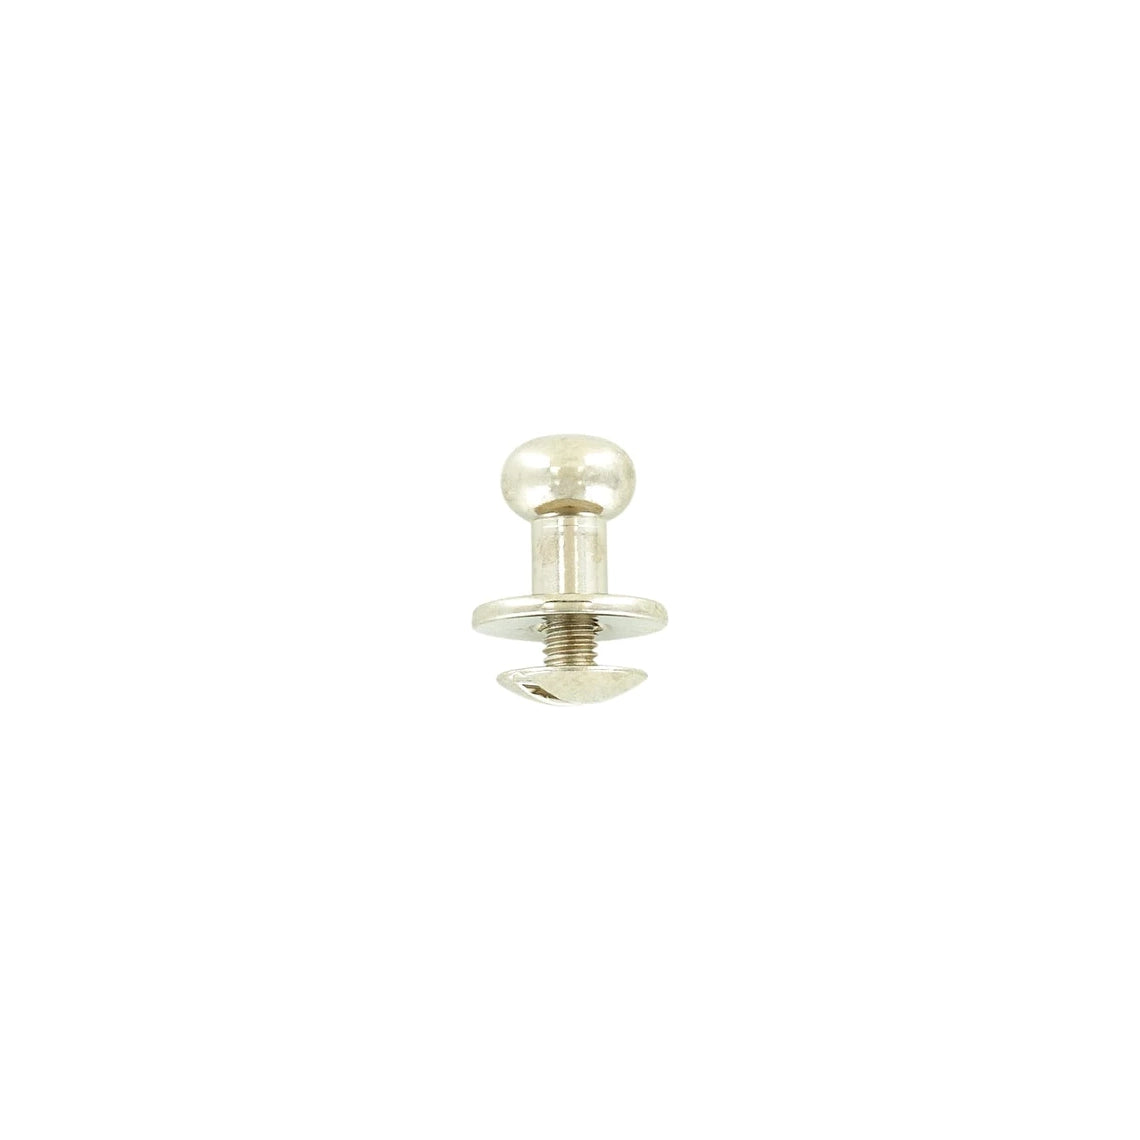 10mm, Shiny Nickel, Flat Top Collar Button Stud with Screw, Solid Brass - PK10, #P-1700-SBN